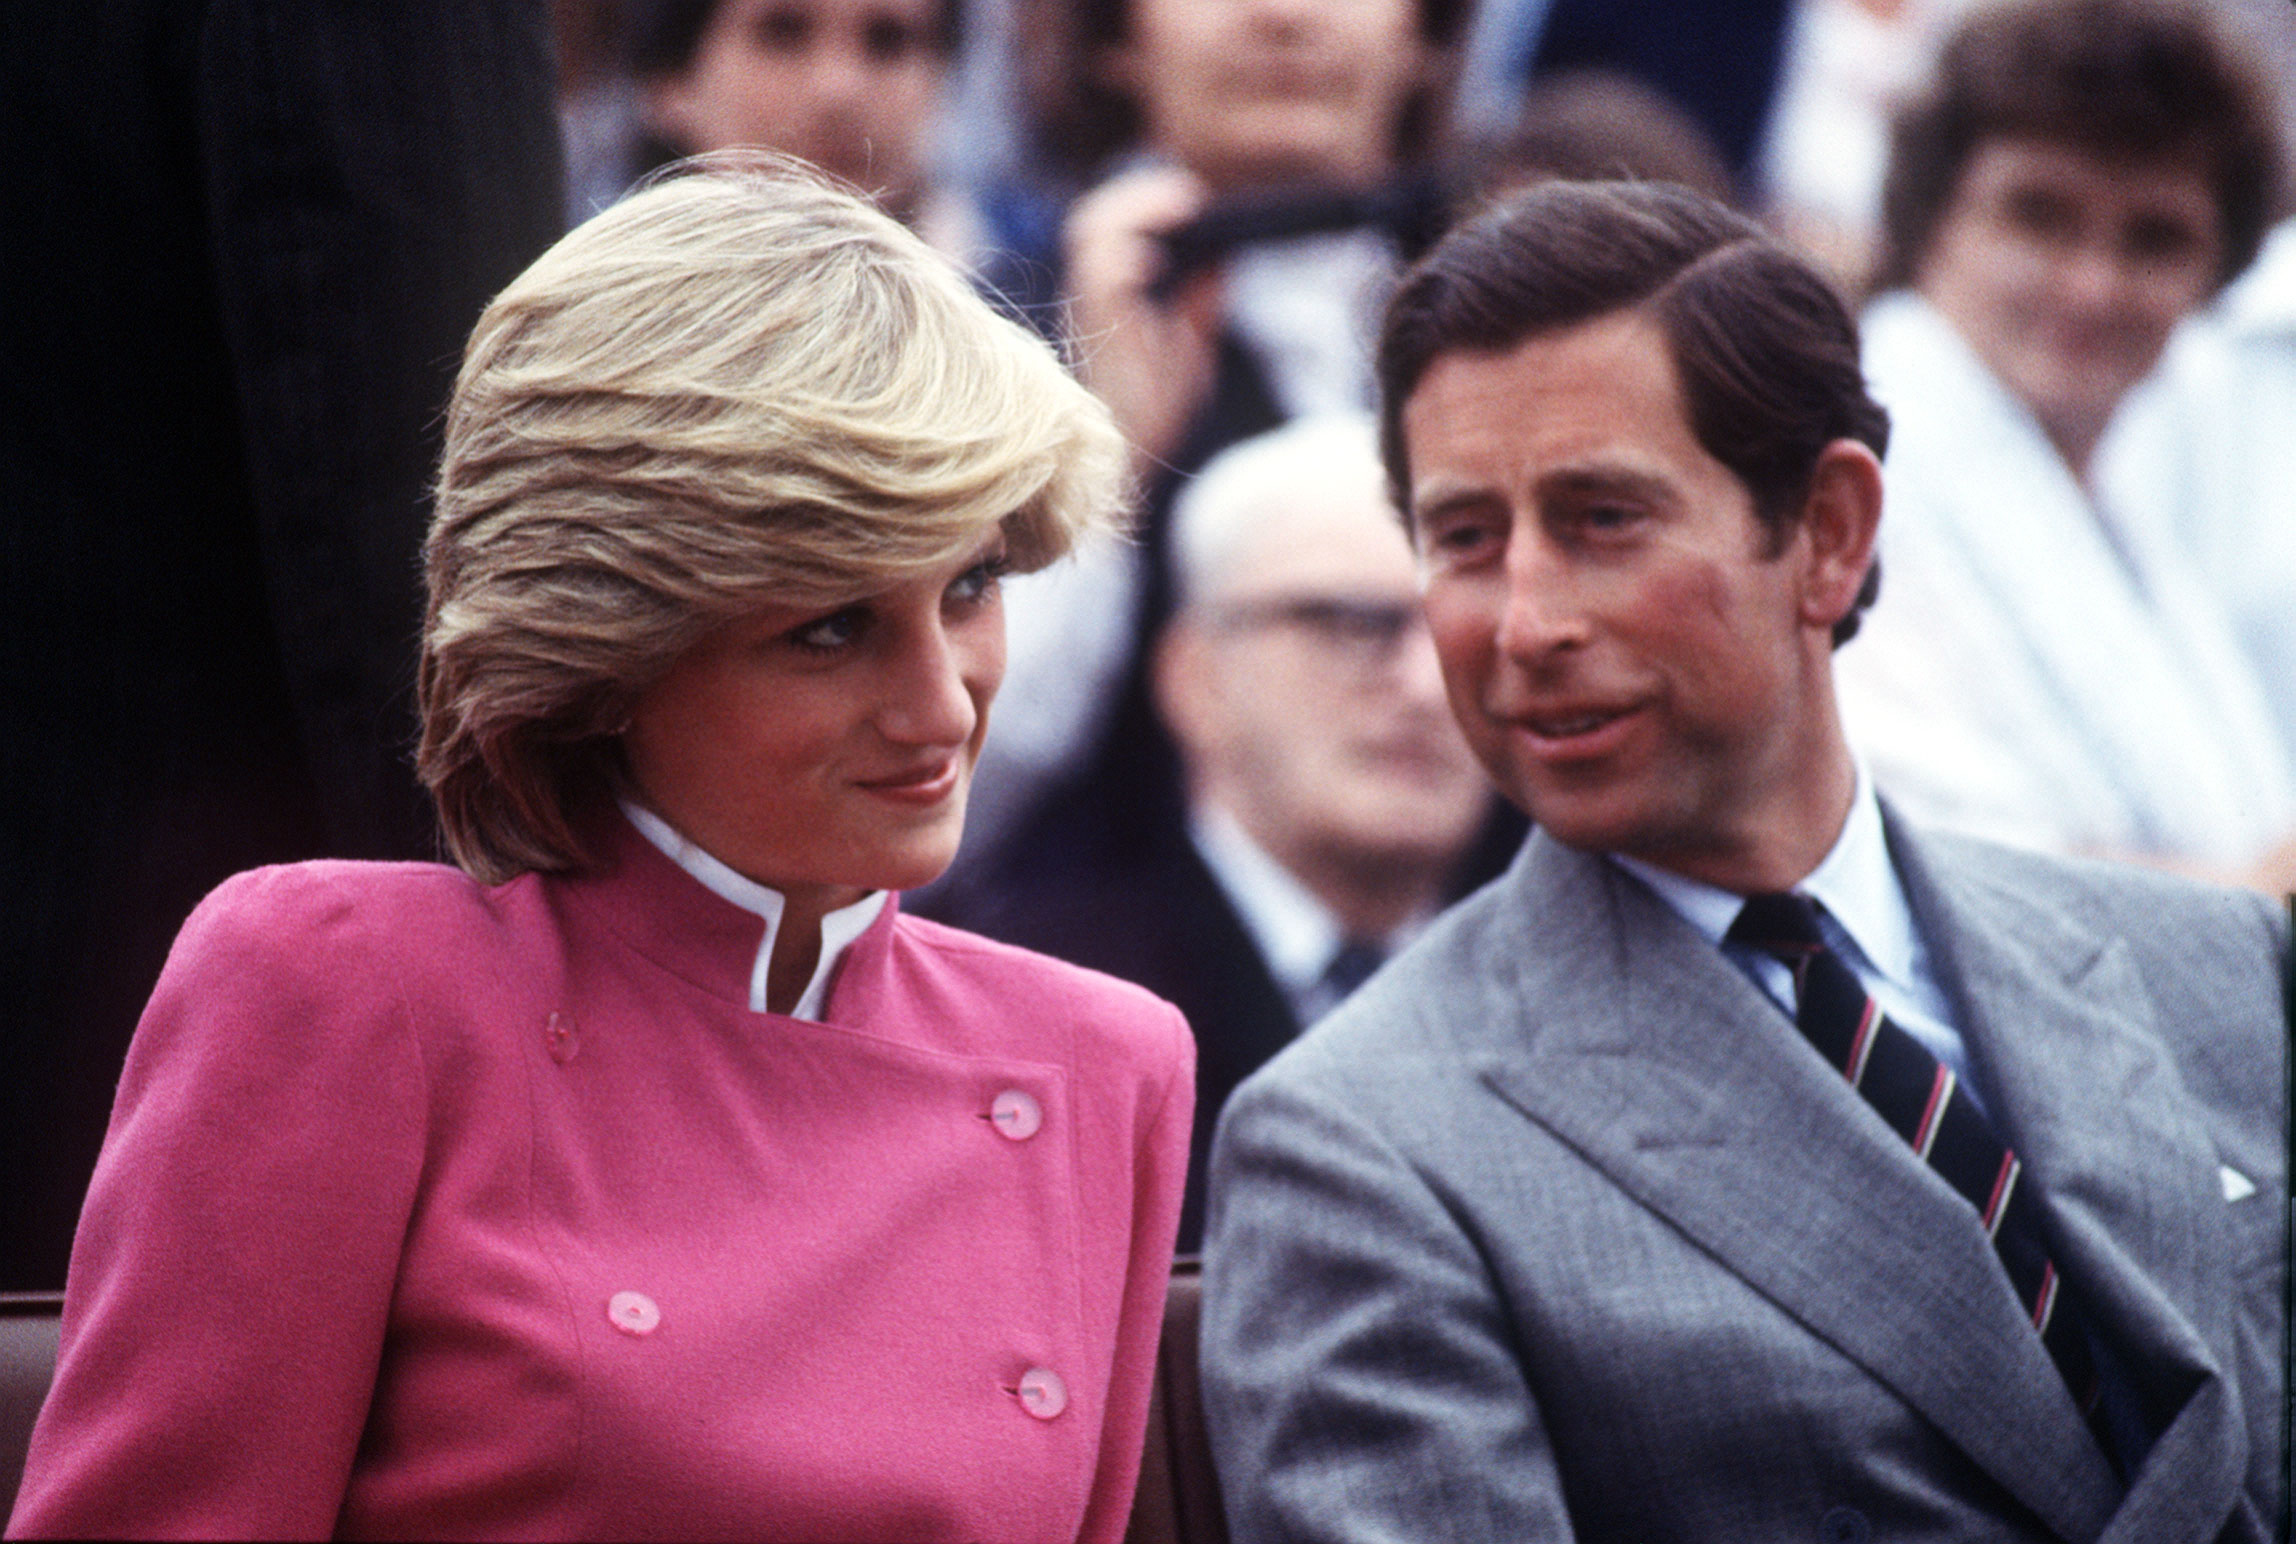 The Prince and Princess of Wales during a visit to Montague, Prince Edward Island, Canada in 1983